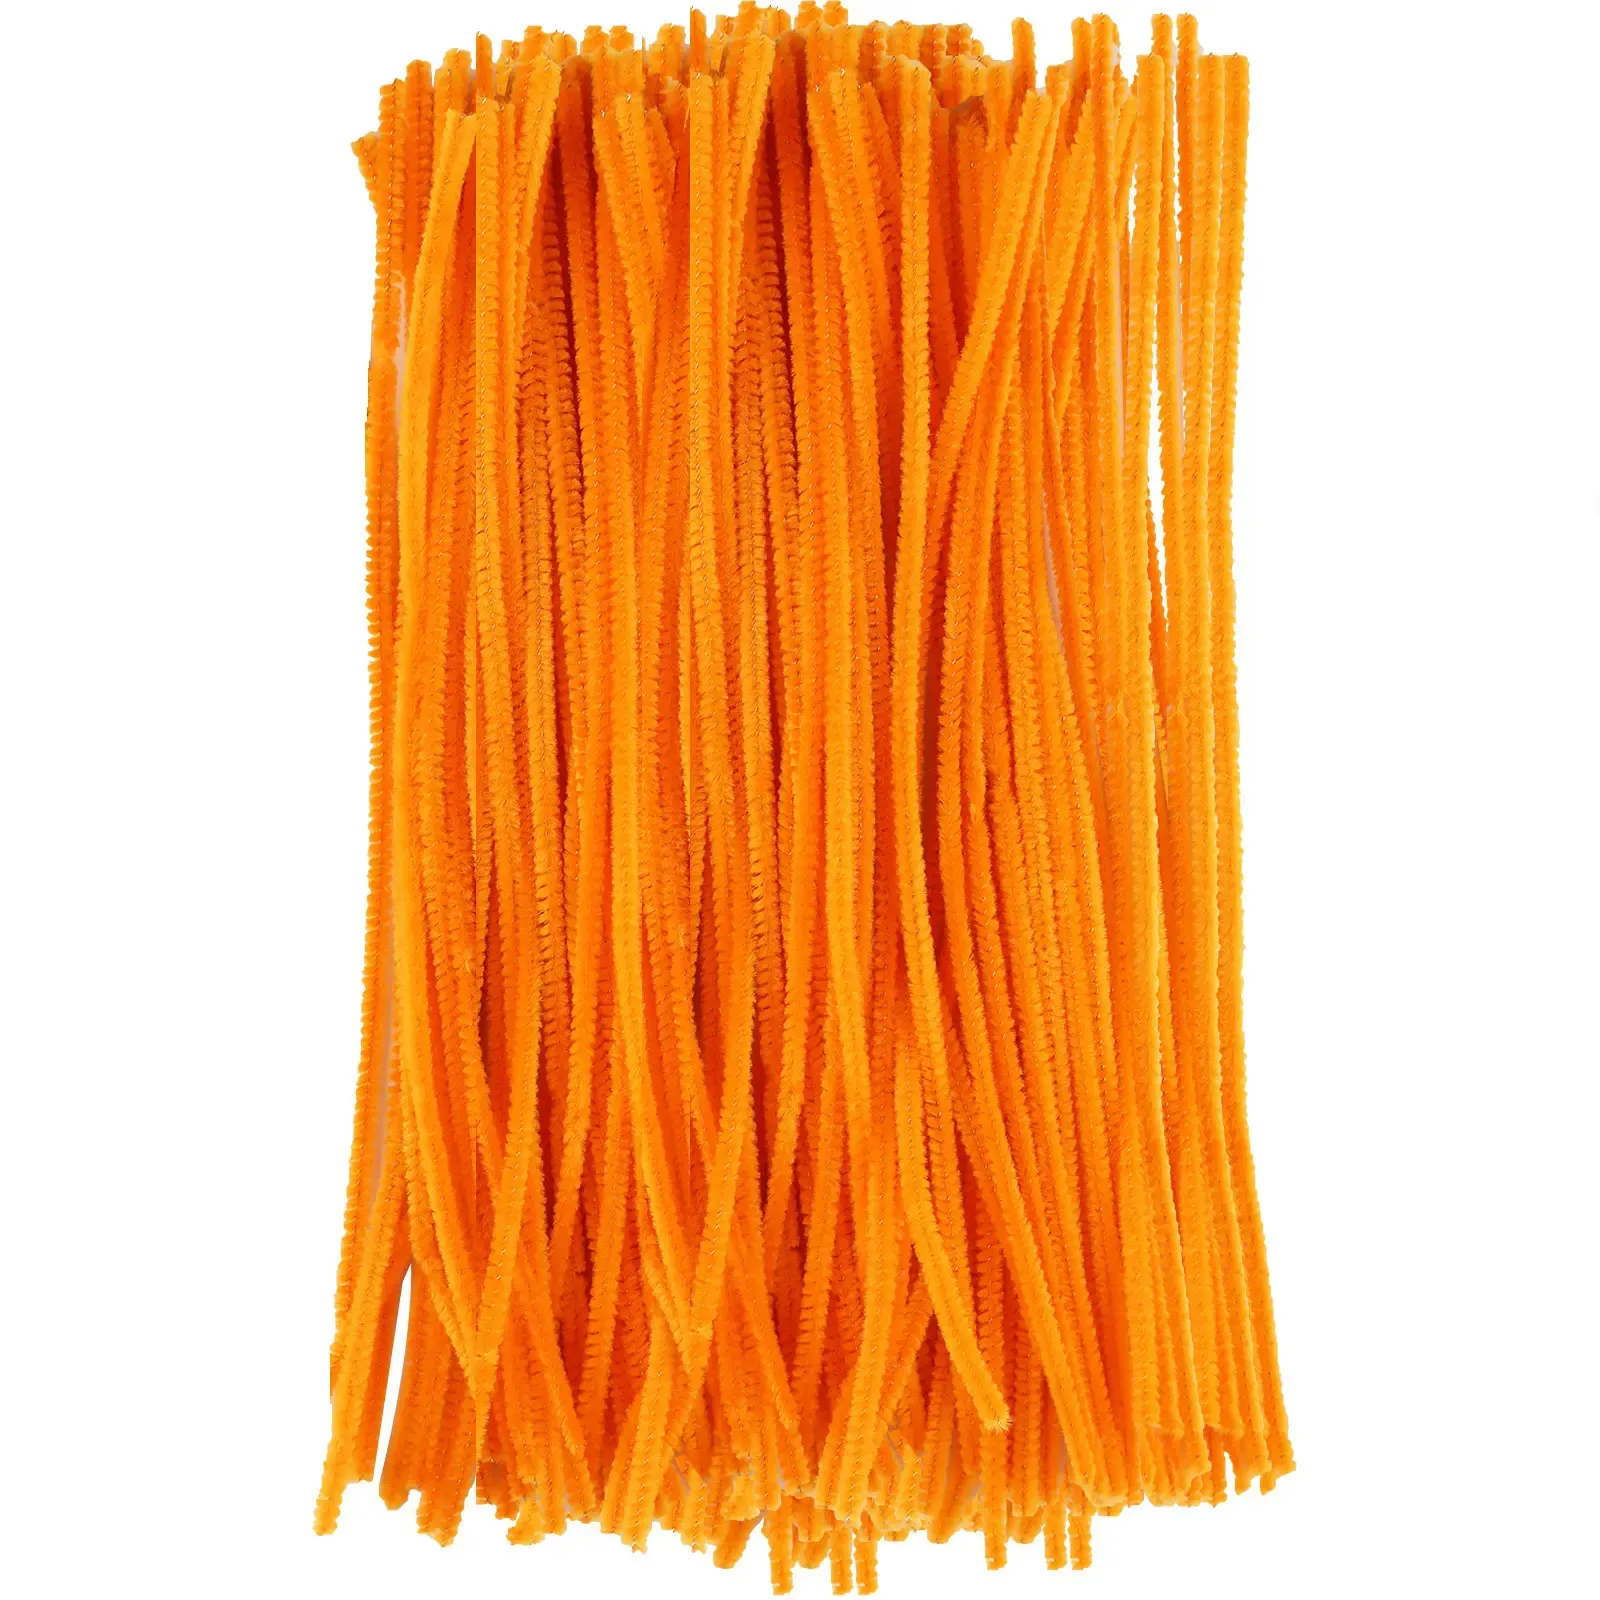 Most Selling Products Chenille Stems Pipe Cleaners Arts And Craft Gold Pipe Cleaners